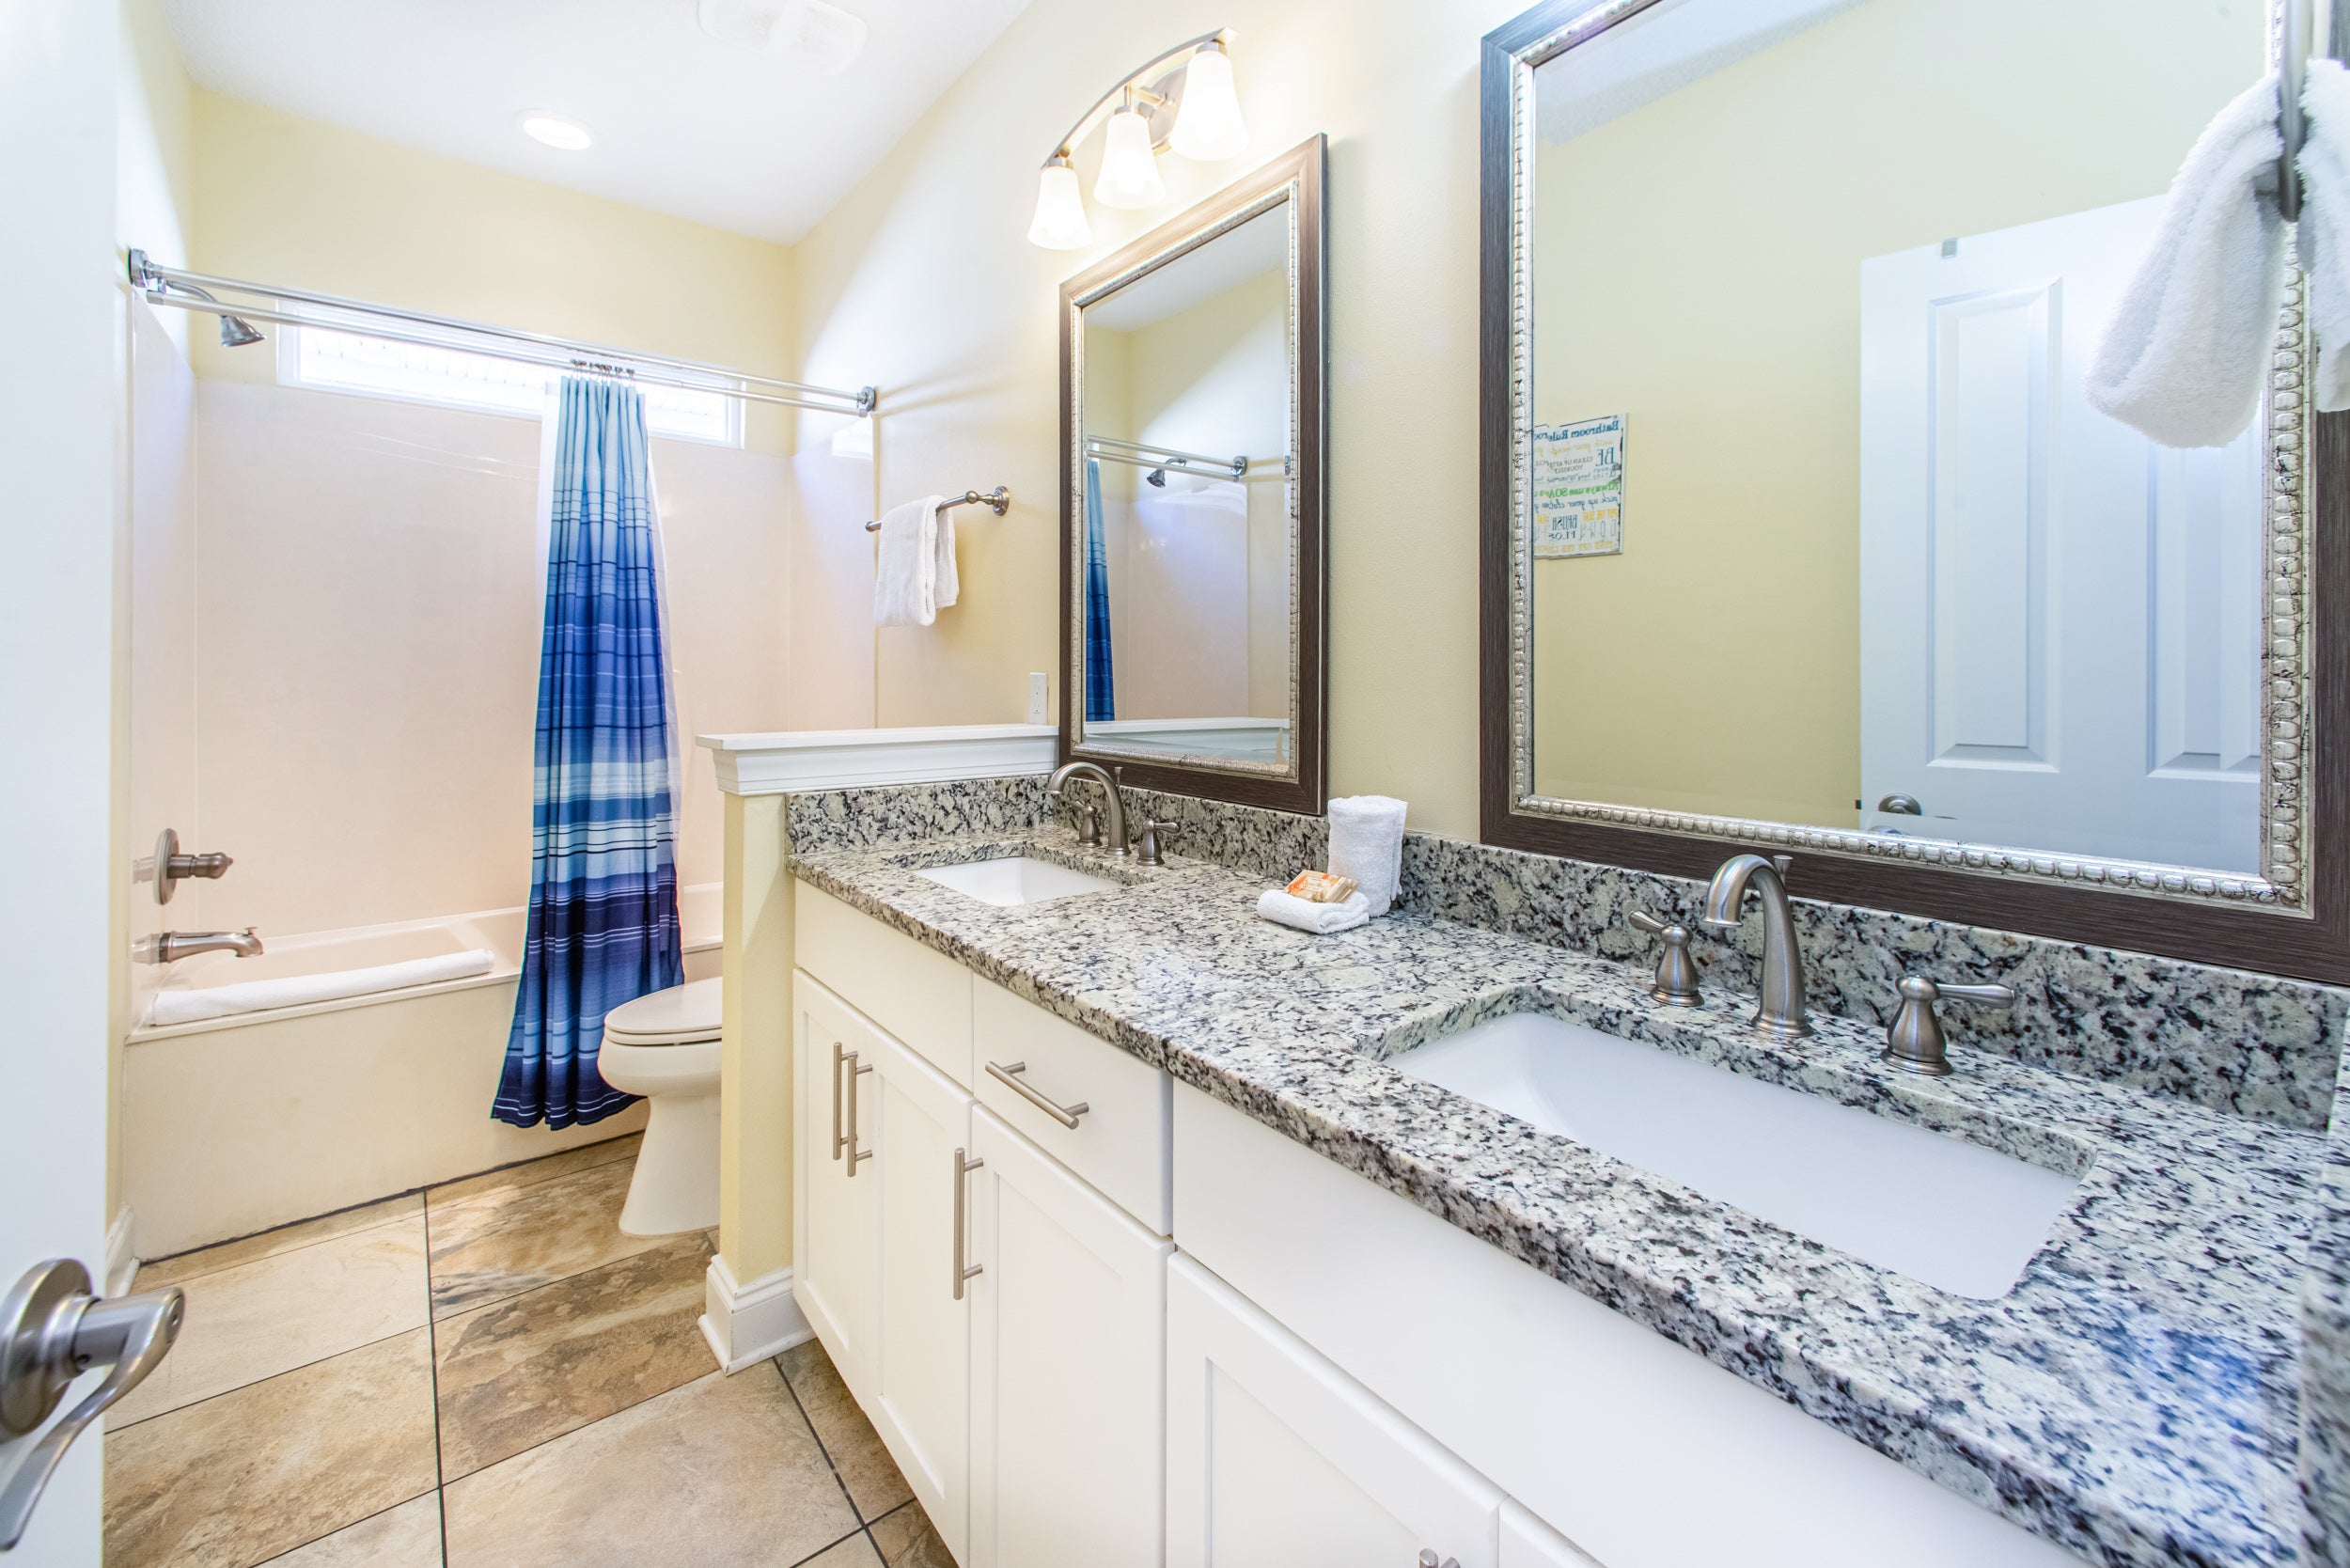 Shared bathroom with shower/tub combo!